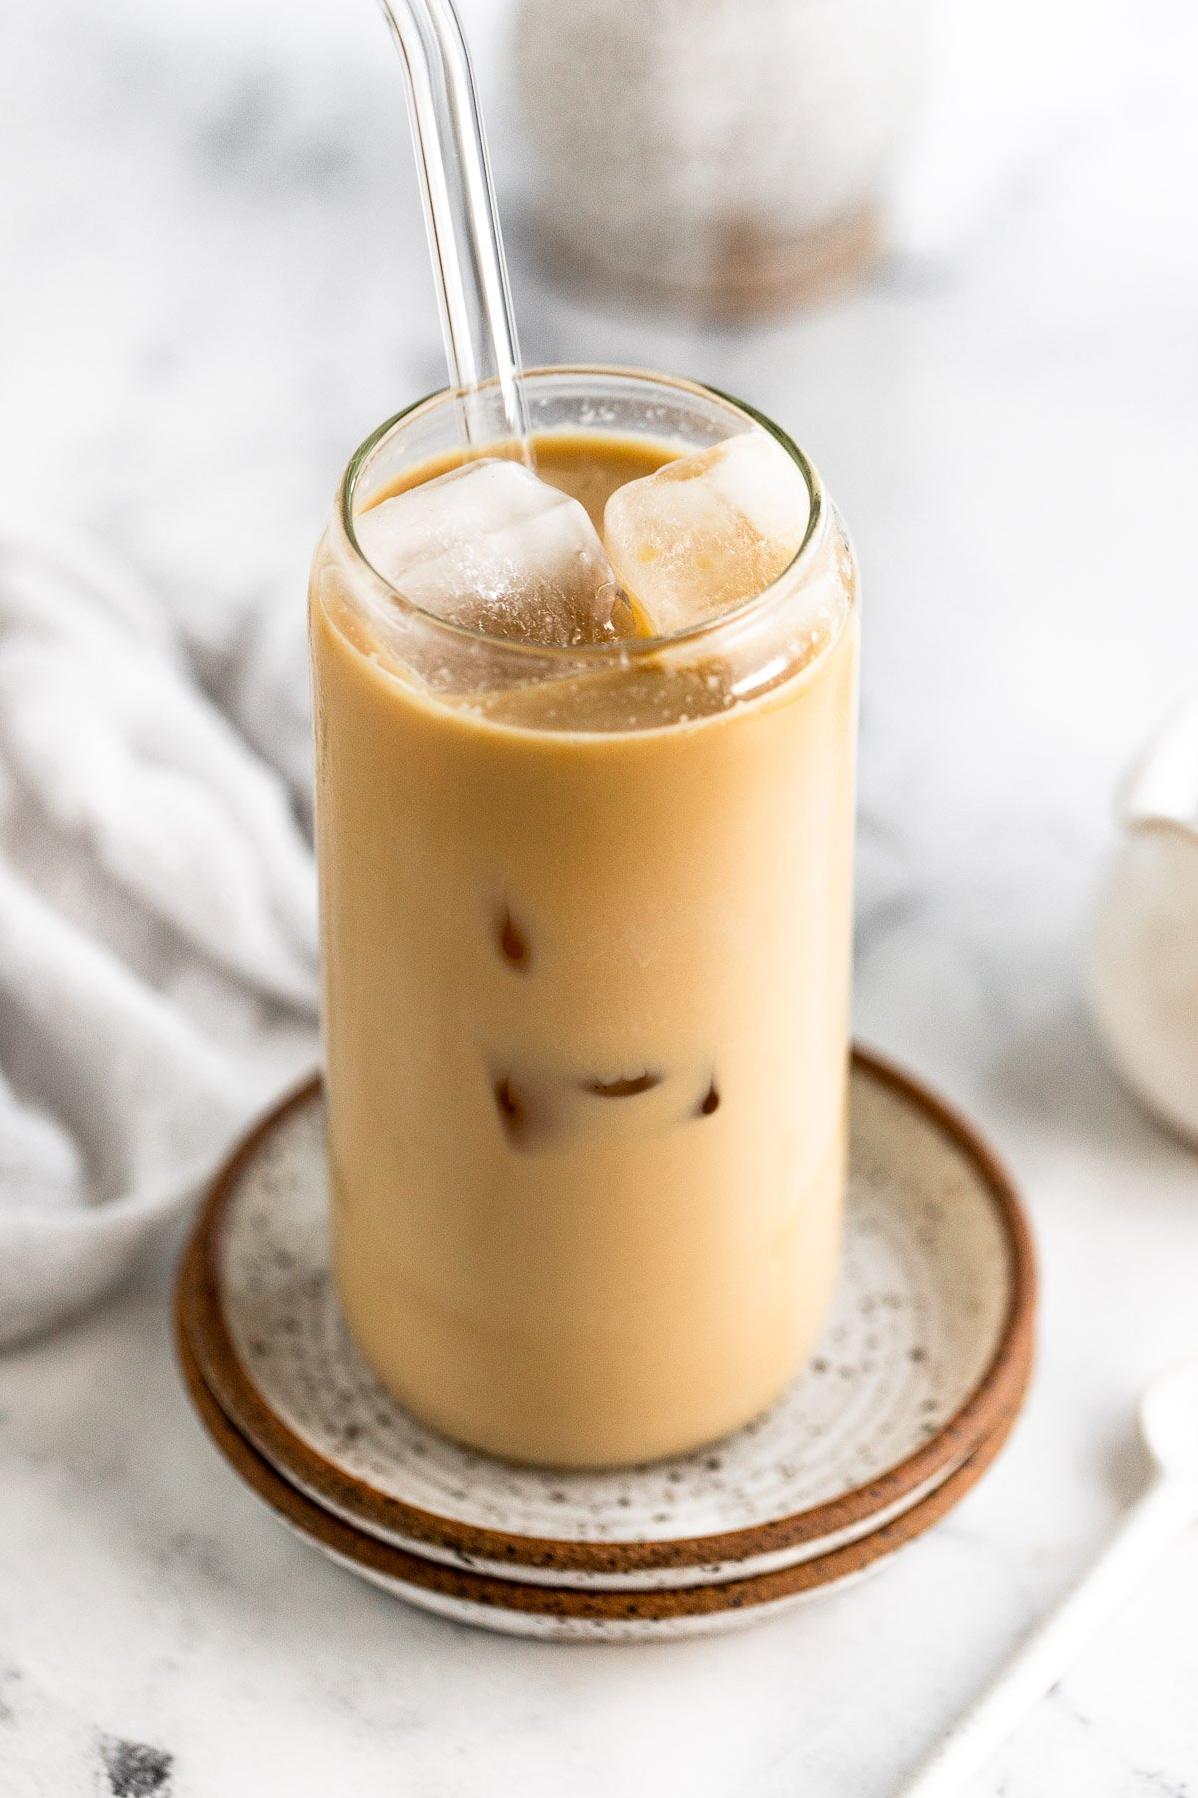  Start your day off right with this Simple Iced Latte